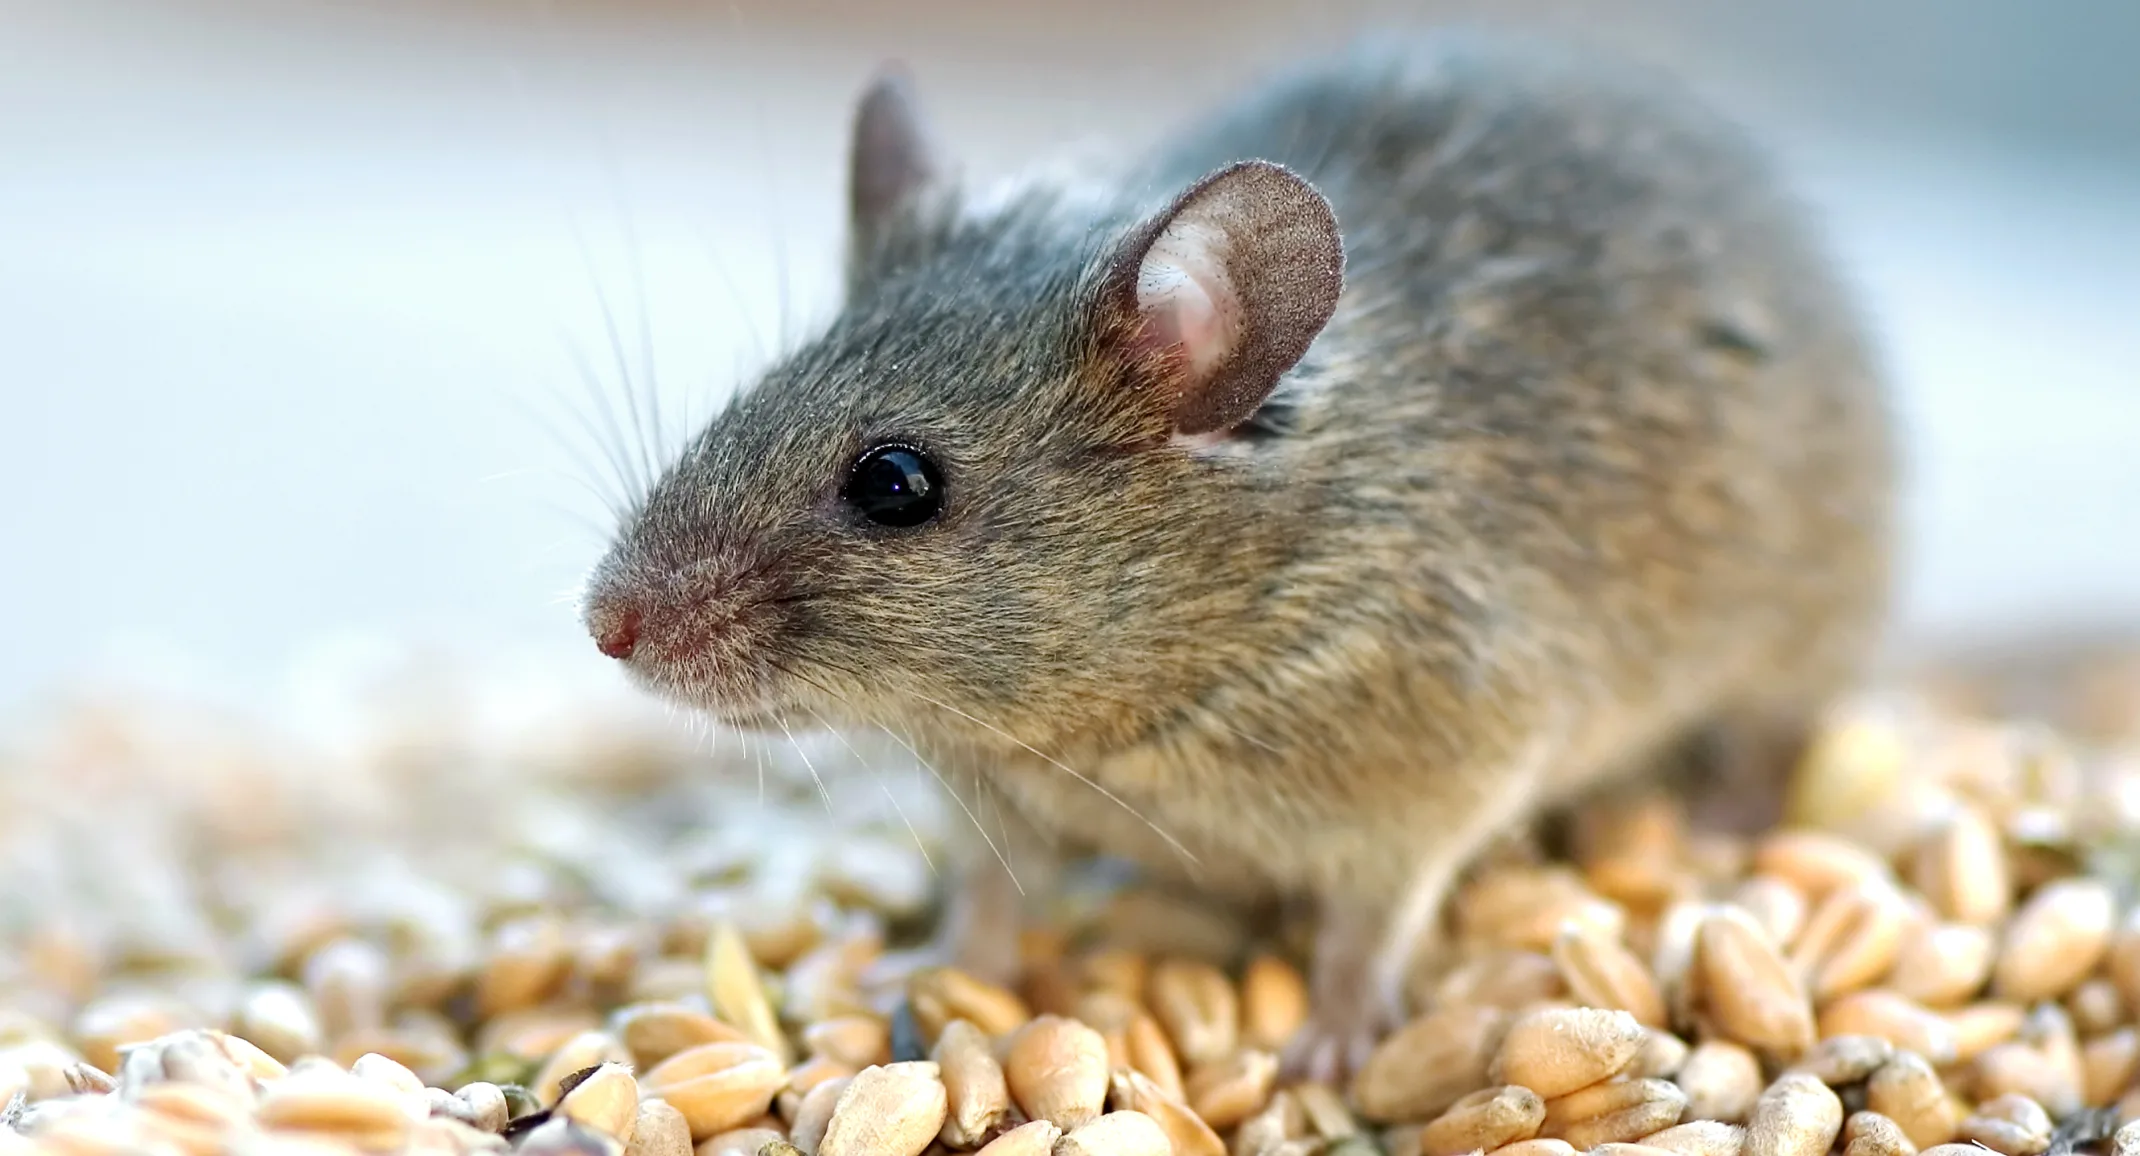 Mouse standing on seeds